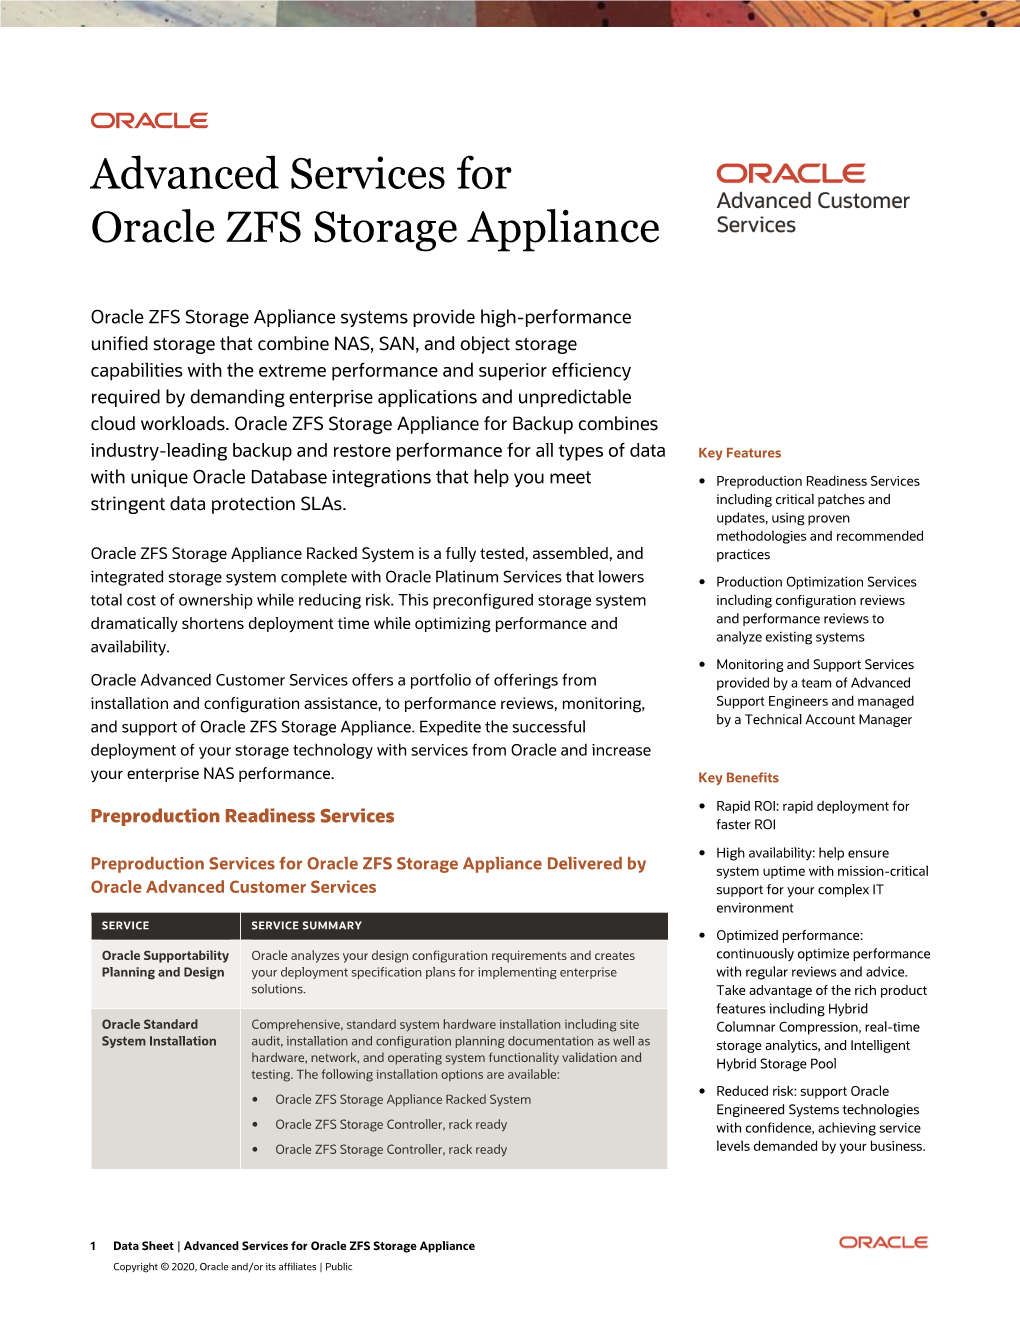 Advanced Services for Oracle ZFS Storage Appliance (PDF)